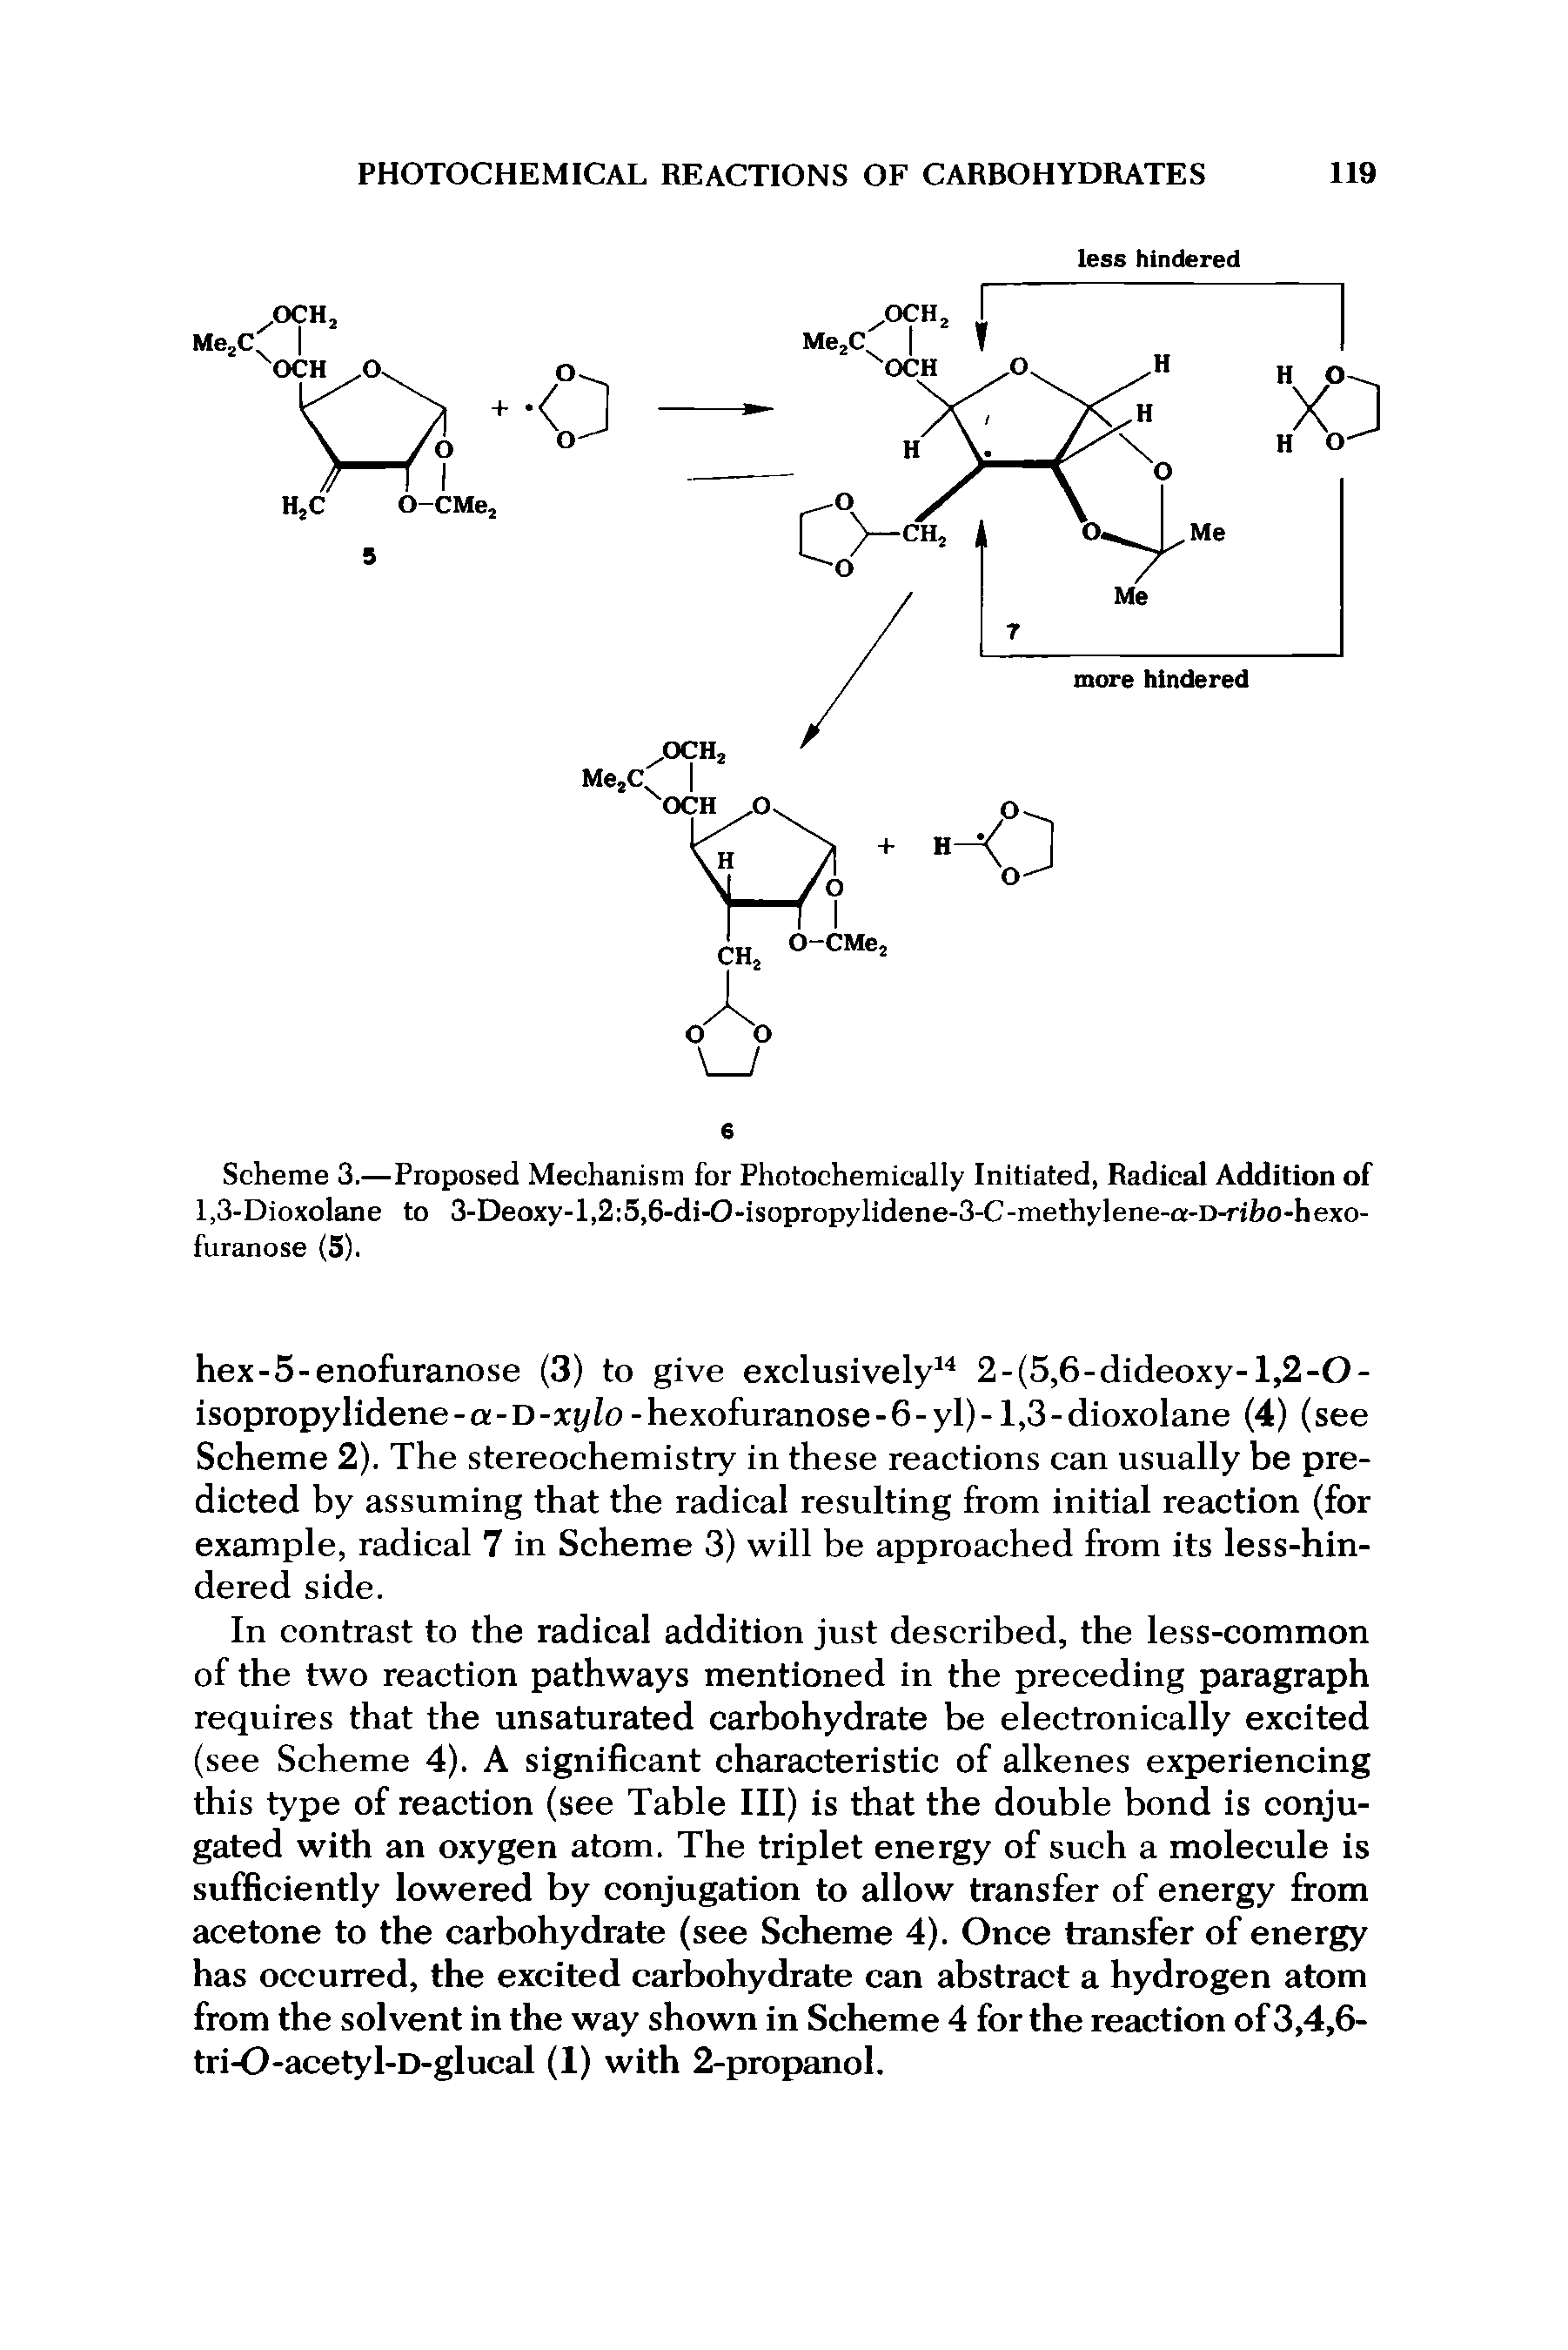 Scheme 3.—Proposed Mechanism for Photochemieally Initiated, Radical Addition of 1,3-Dioxolane to 3-Deoxy-l,2 5,6-di-0-isopropylidene-3-C-methylene-a-D-riho-hexo-furanose (5).